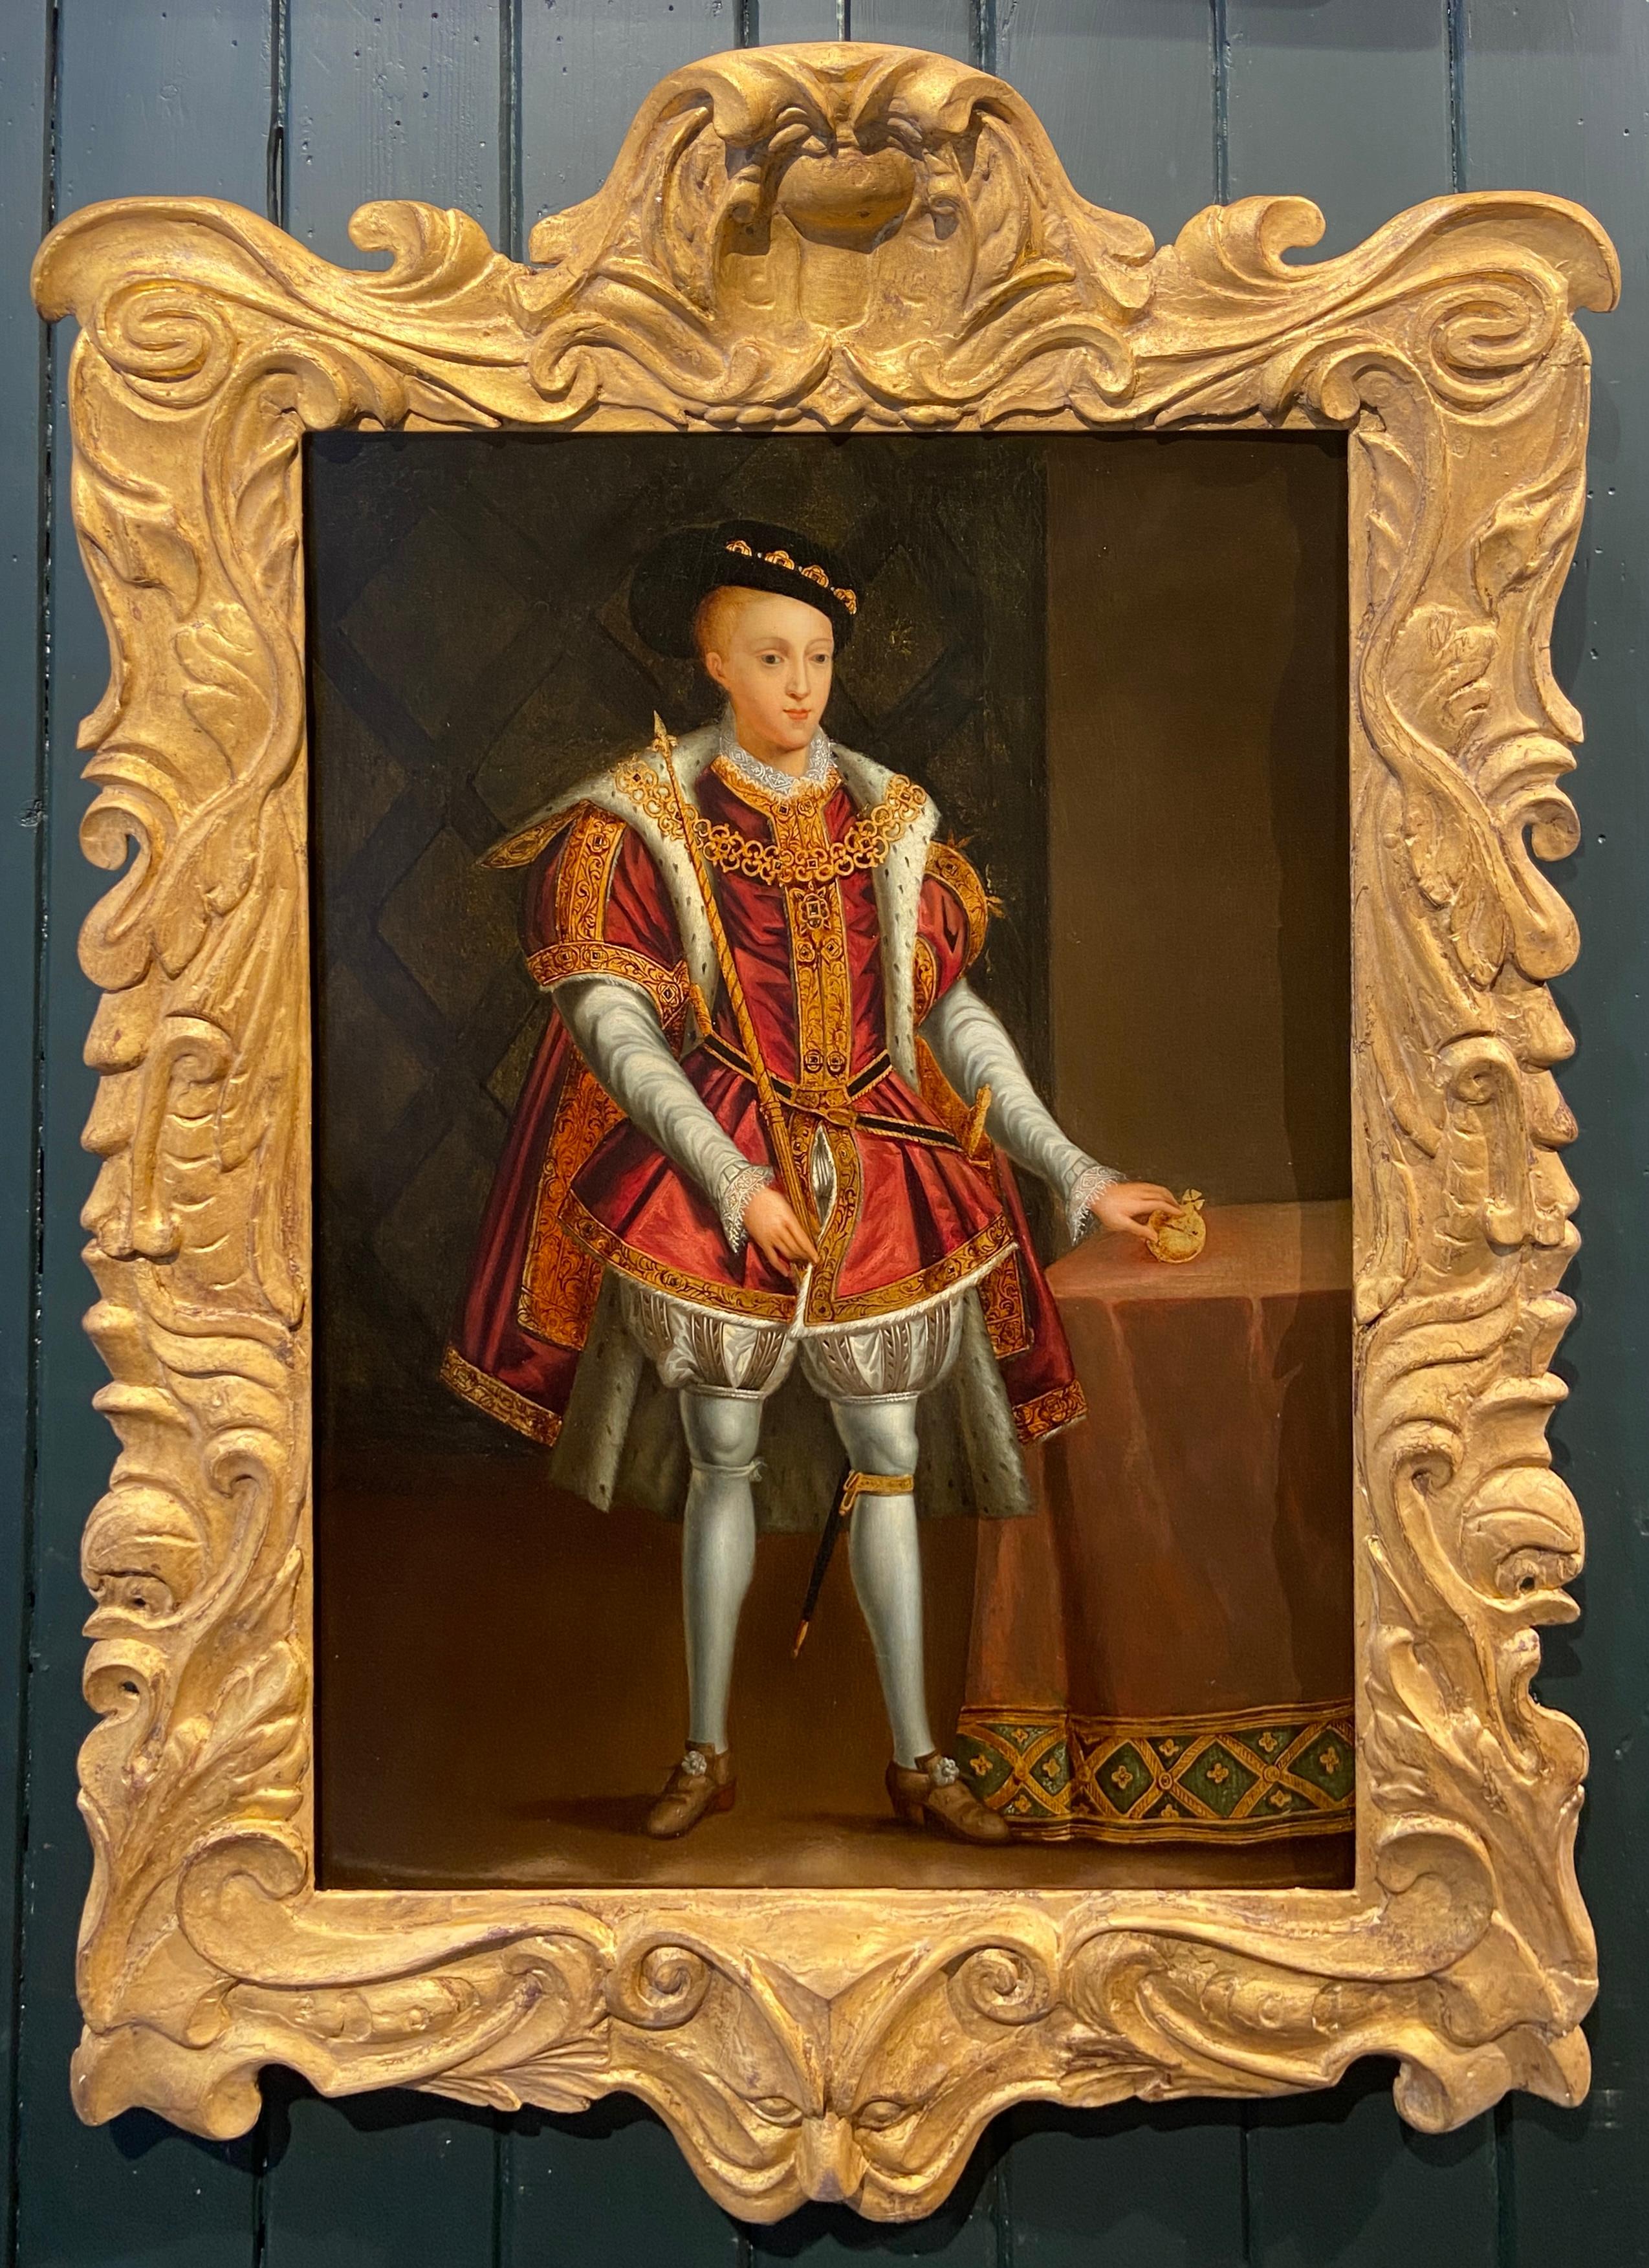 English school 18th century Portrait Painting - Portrait of King Edward VI, Oil on panel with Gold Leaf, 18th Century English